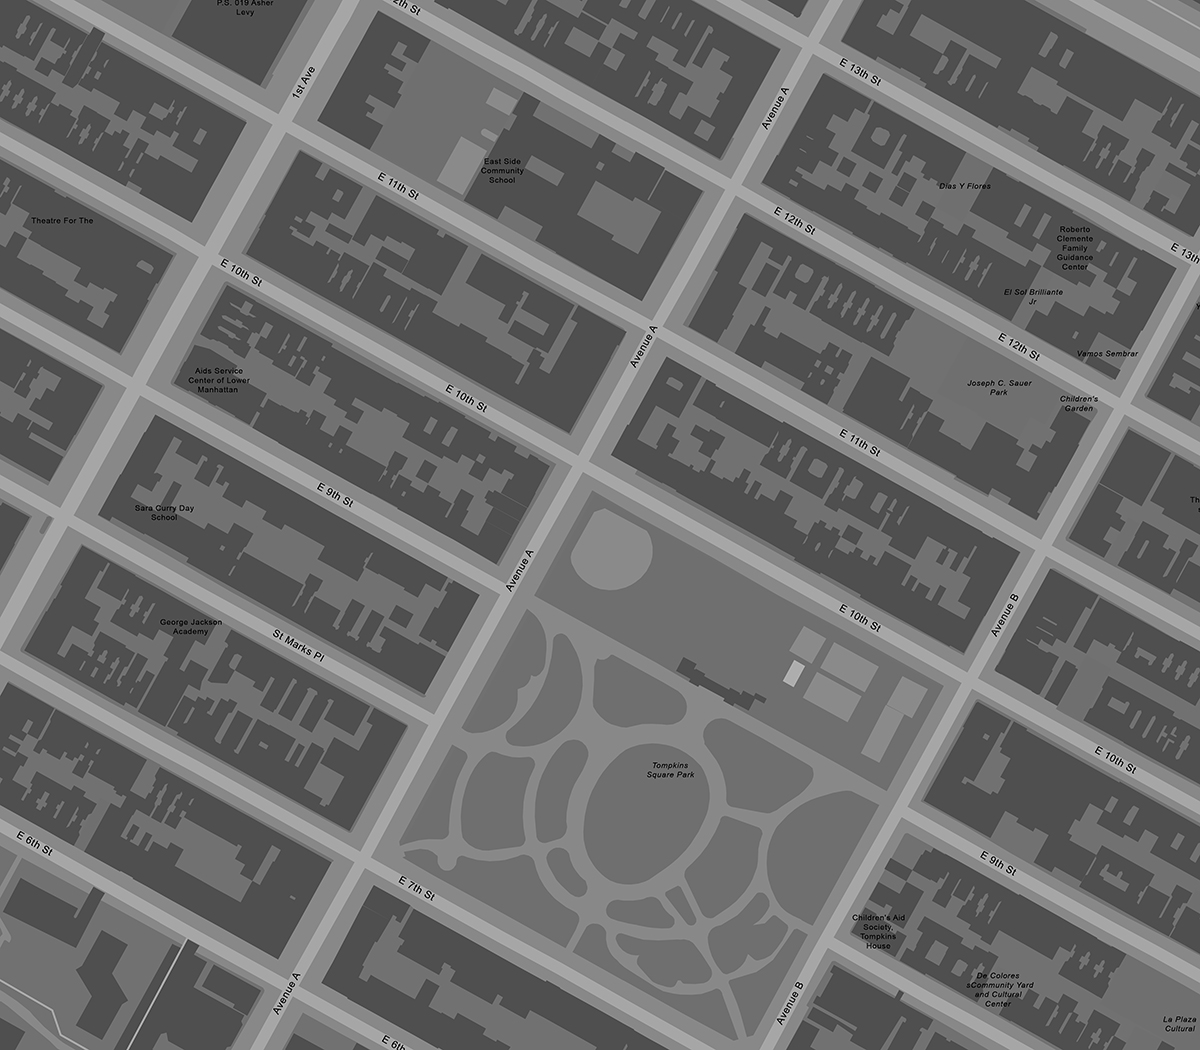 Aerial map of a section of Lower Manhattan showing the city blocks surrounding Tomkins Square Park, including 1st Ave, Avenue A and Avenue B, where they intersect with East 6th Street through East 13th Street.